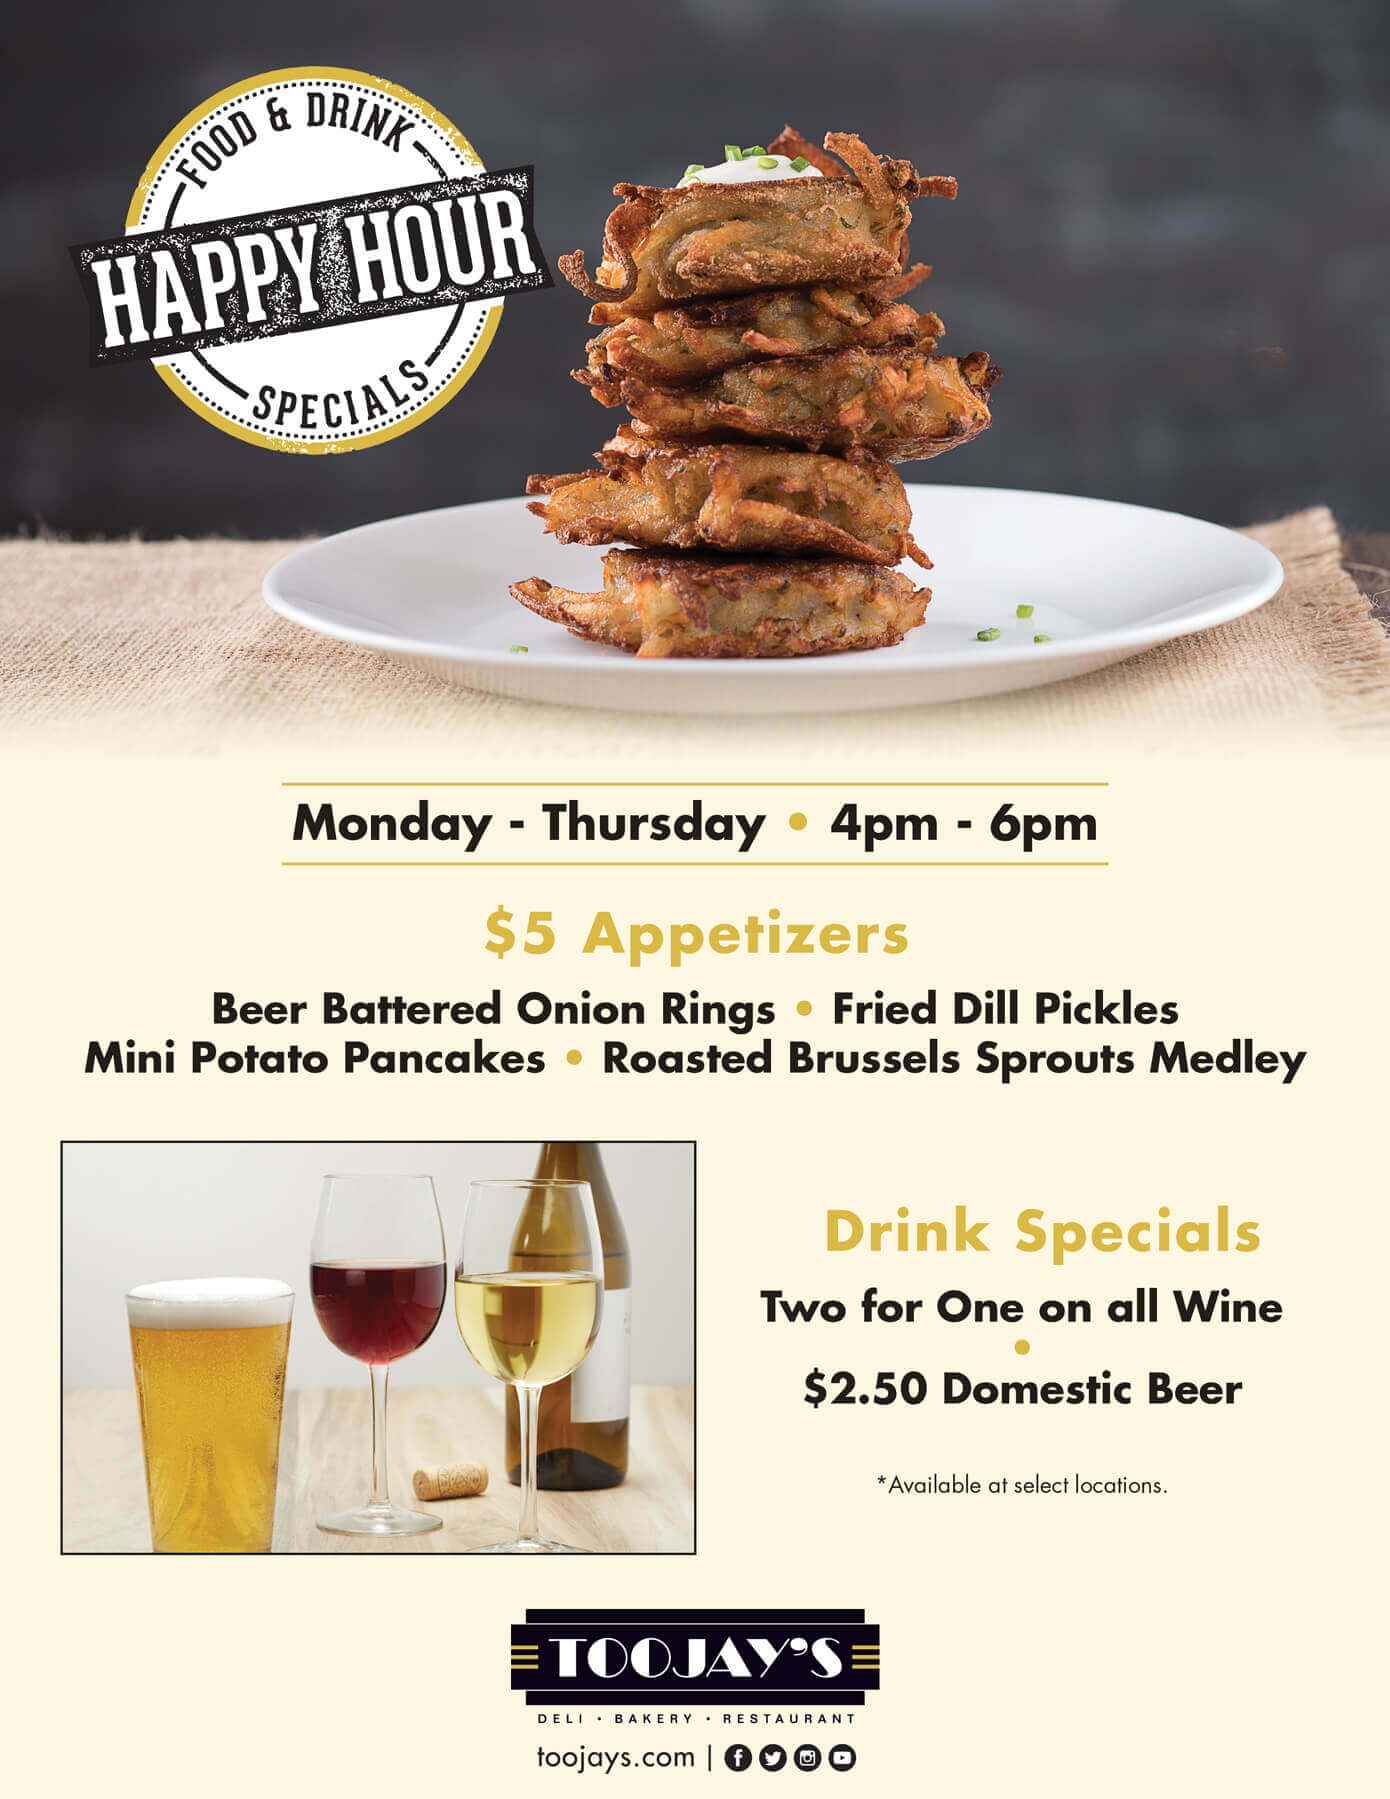 Happy Hour - Food & Drink Specials: Monday - Thrusday / 4pm - 6pm. $5 Appetizers: Beer battered onion rings / Fried dill pickles / Mini potato pancakes / Roasted brussels sprouts medley. Drink Specials: Two for One on all Wine / $2.50 Domestic Beer